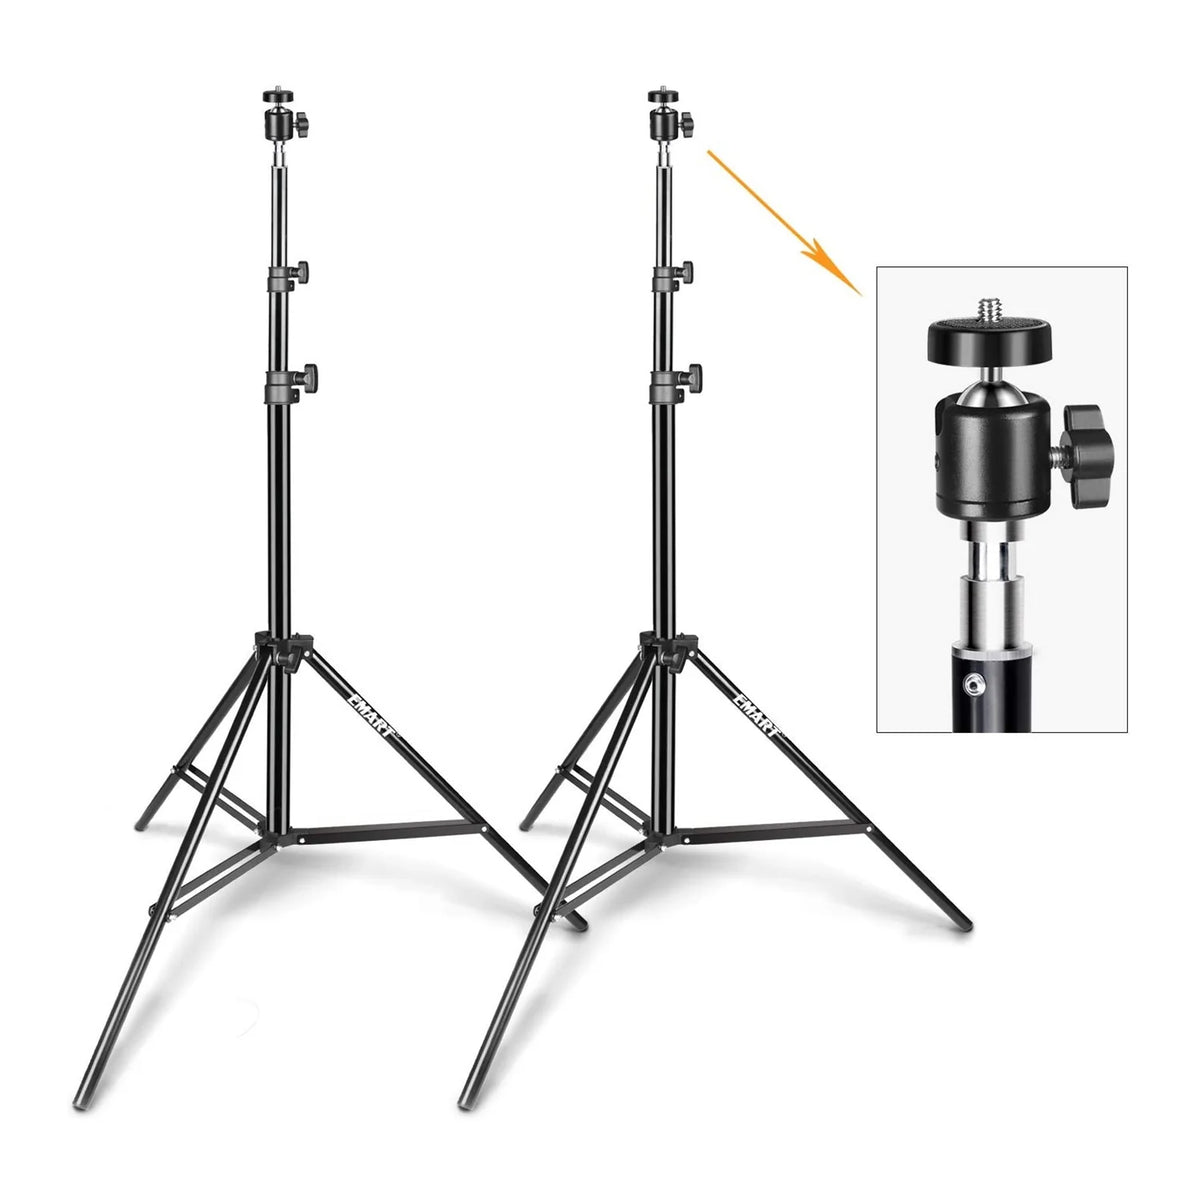 Lighthouse Mount Stand Kit, VR Devices